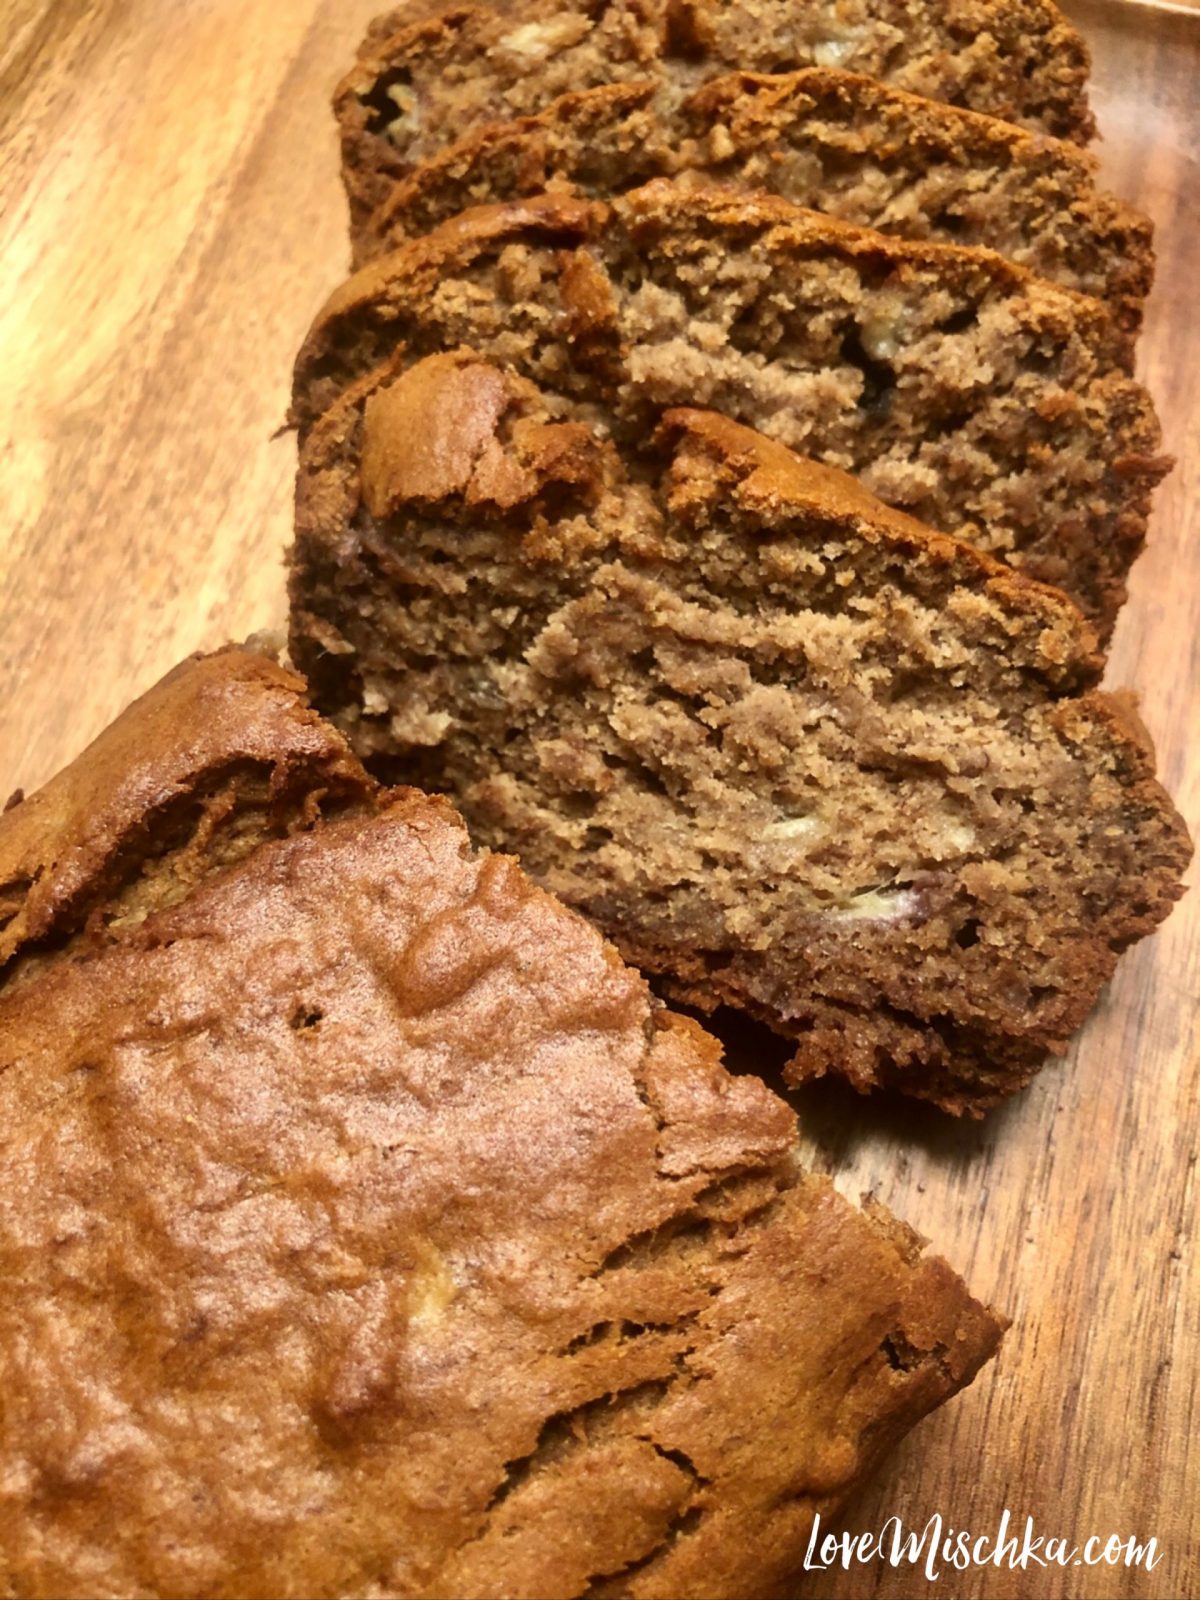 A brown loaf of moist banana bread with a few pieces sliced and laid out on wood.